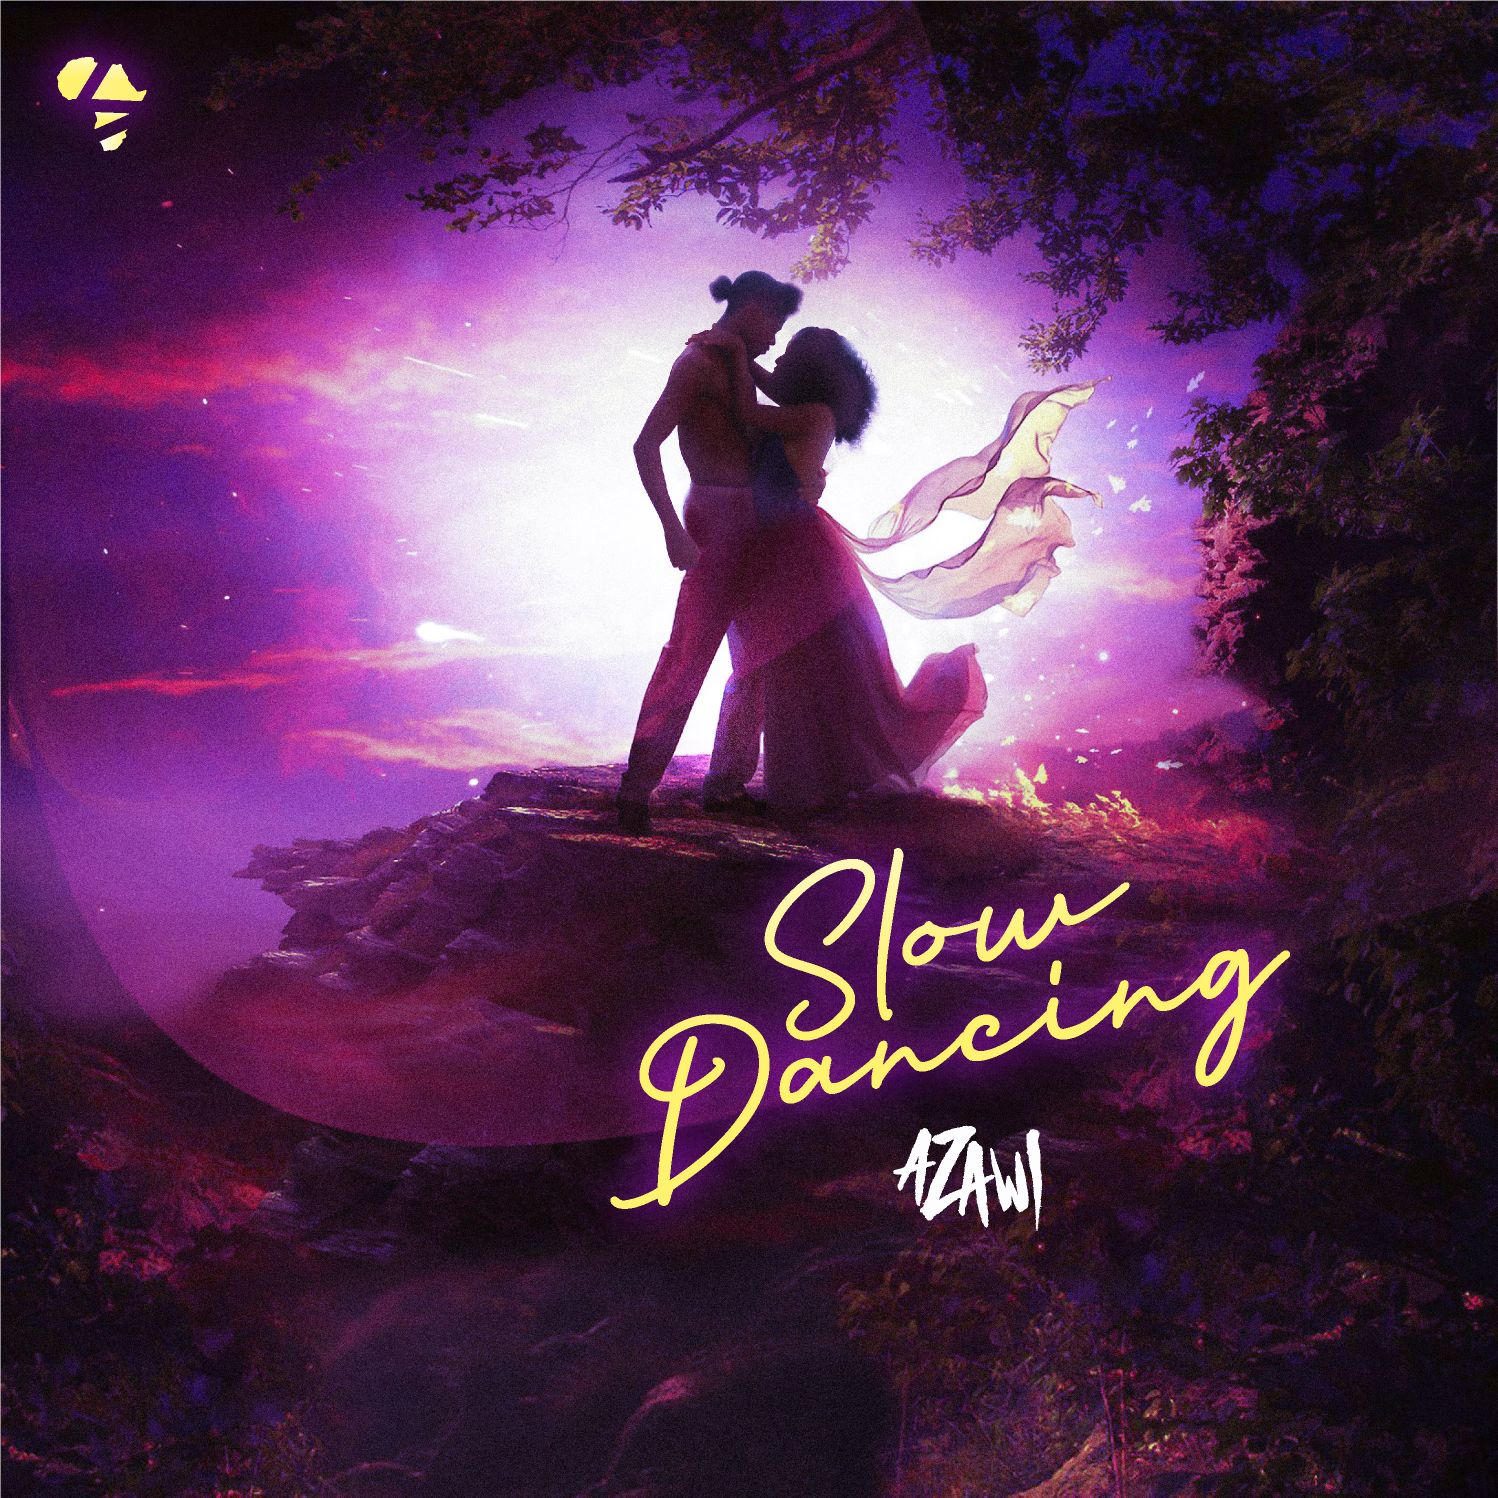 Azawi releases second single, Slow Dancing